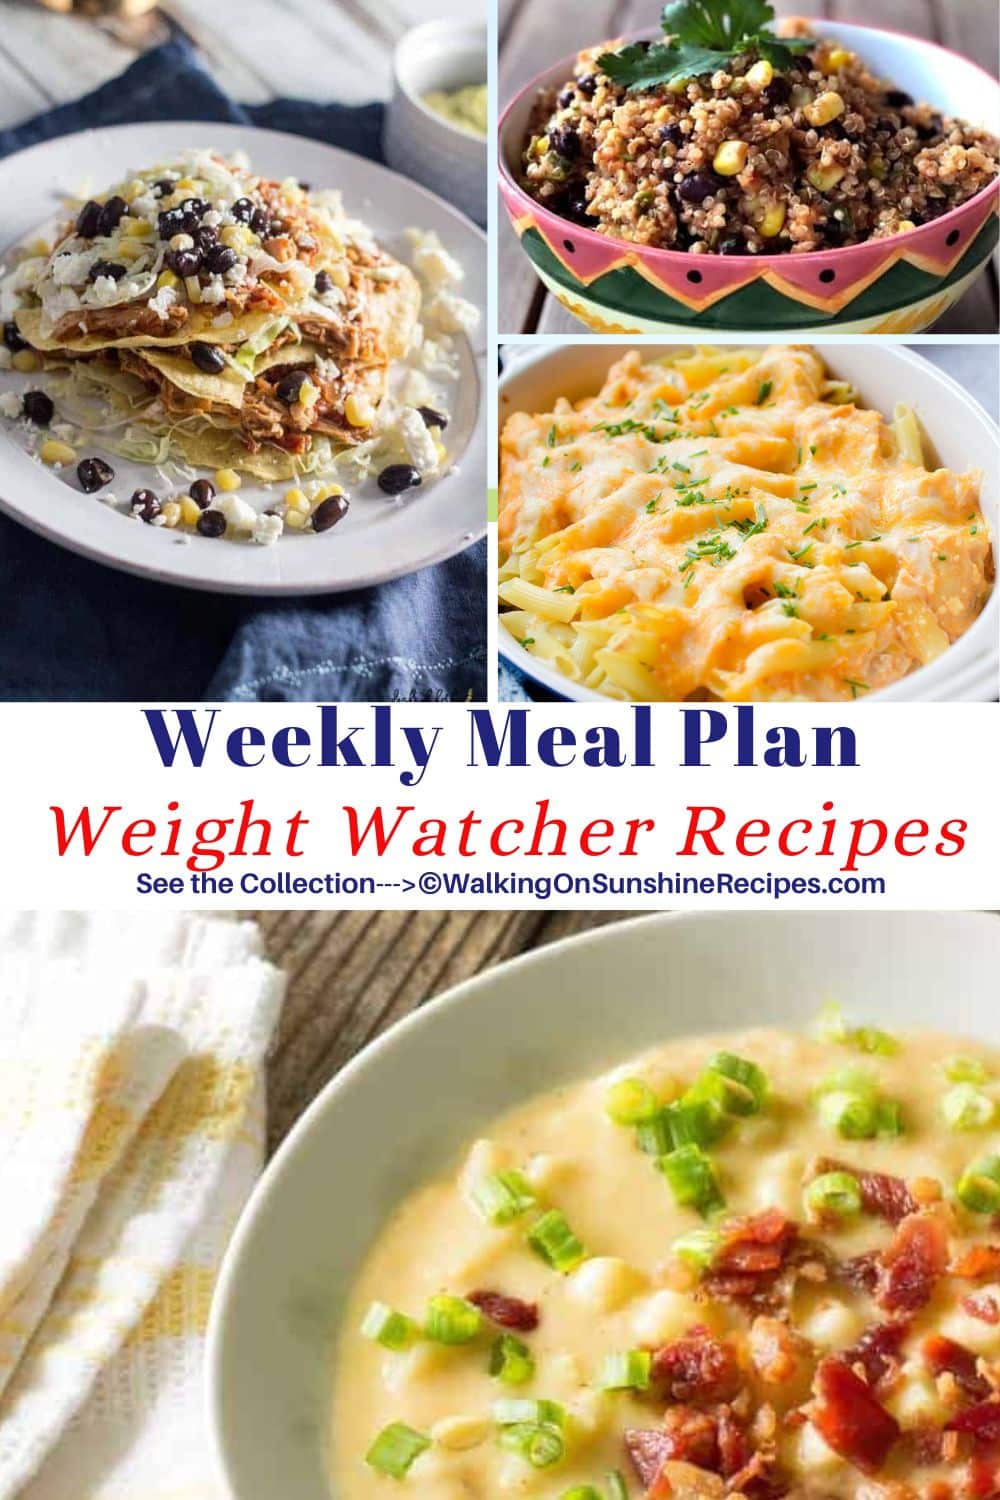 7 Weight Watcher Recipes featured for this week's meal plan.